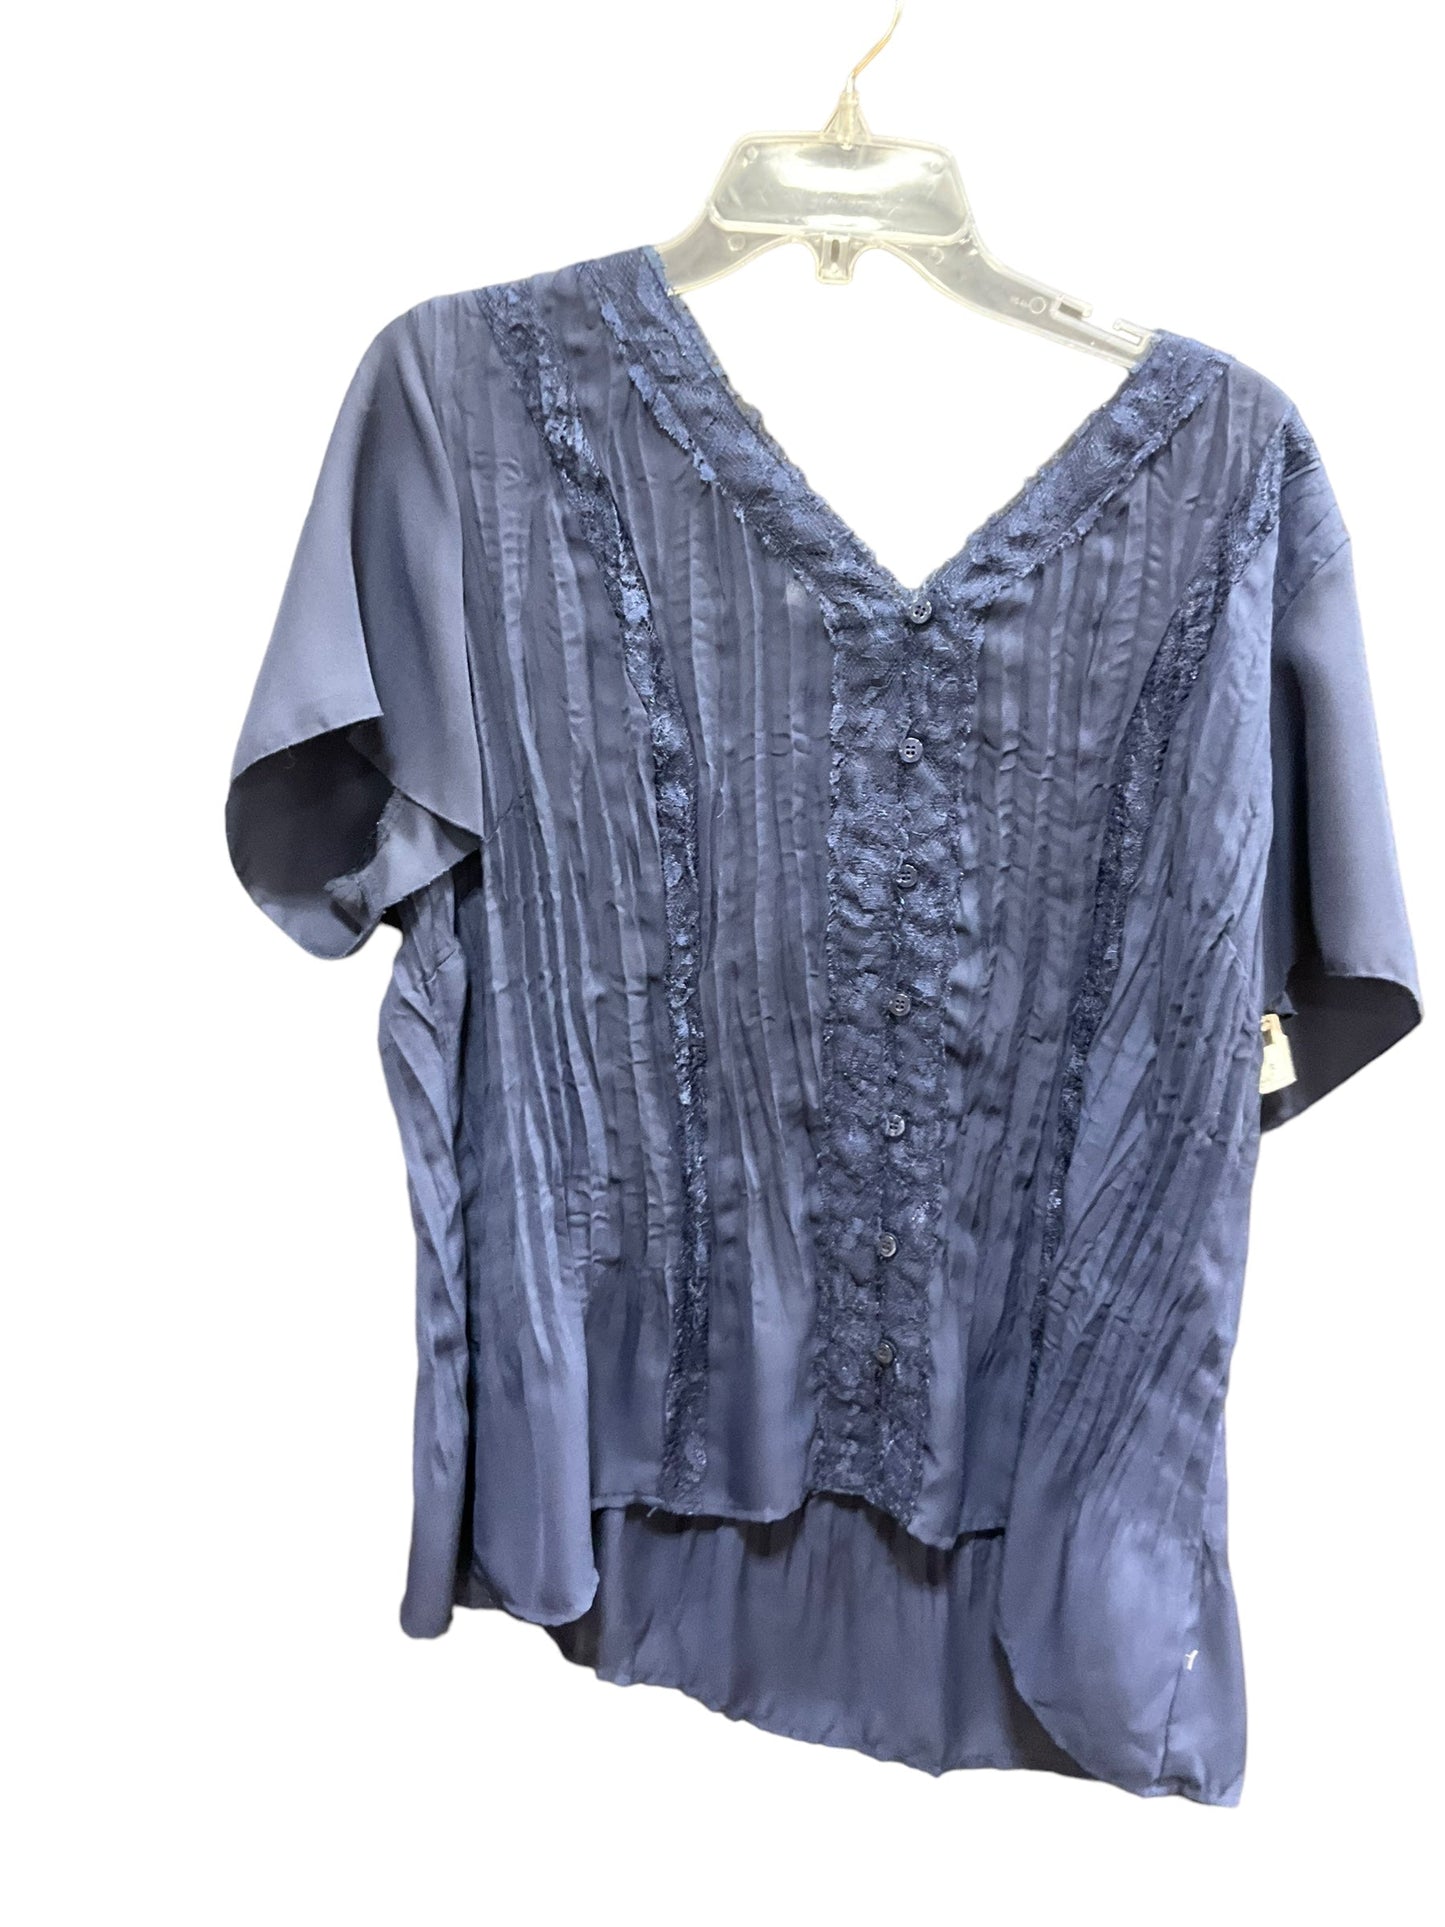 Blue Top Short Sleeve Ny Collection, Size 2x